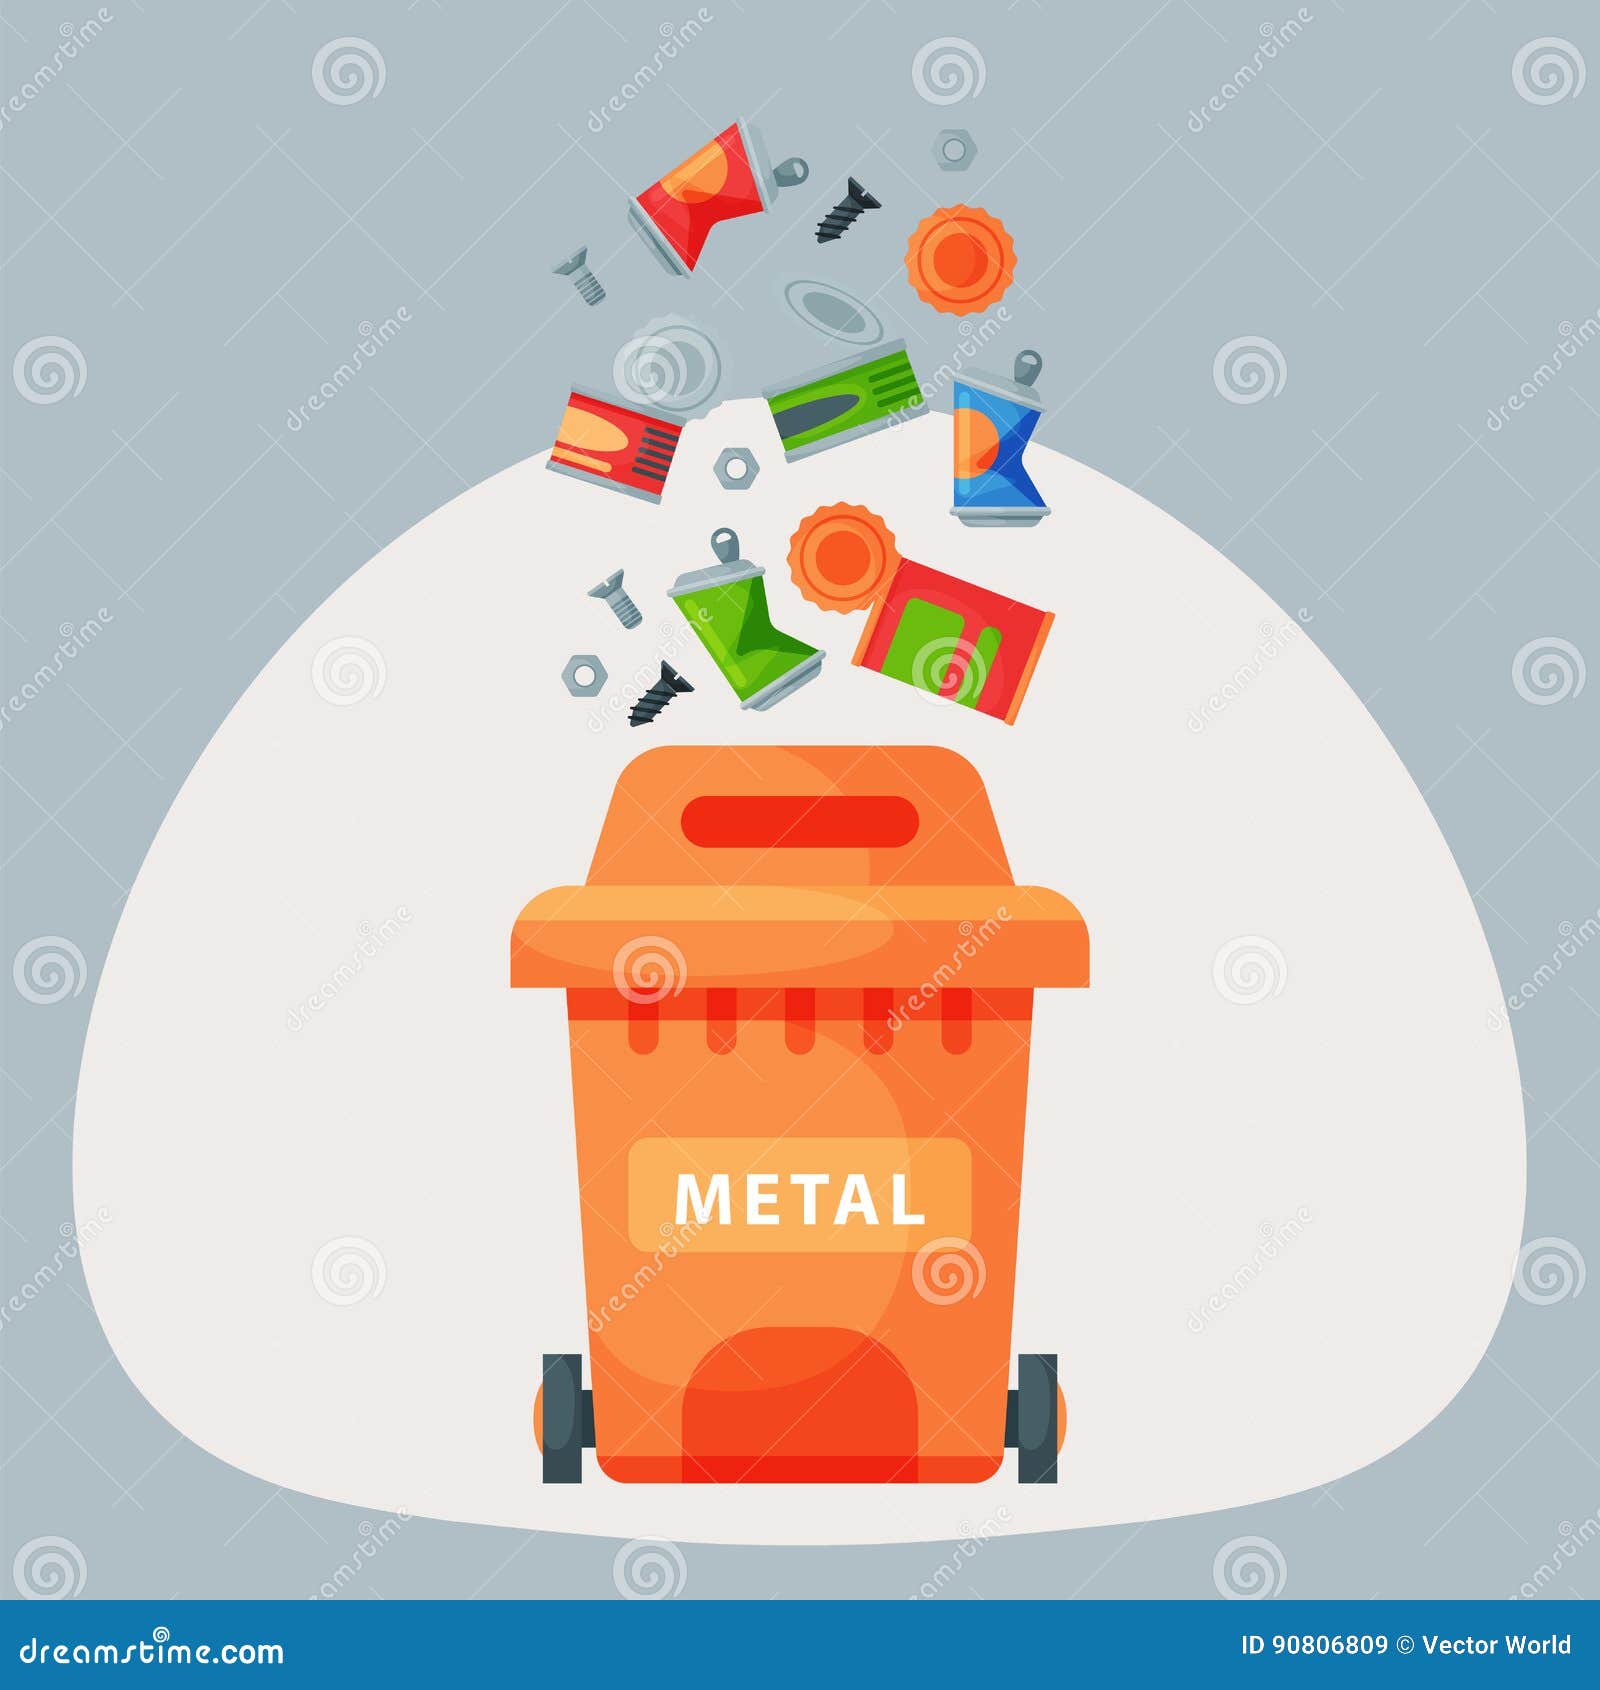 https://thumbs.dreamstime.com/z/recycling-garbage-metal-elements-trash-bags-tires-management-industry-utilize-waste-can-vector-illustration-concept-ecology-90806809.jpg